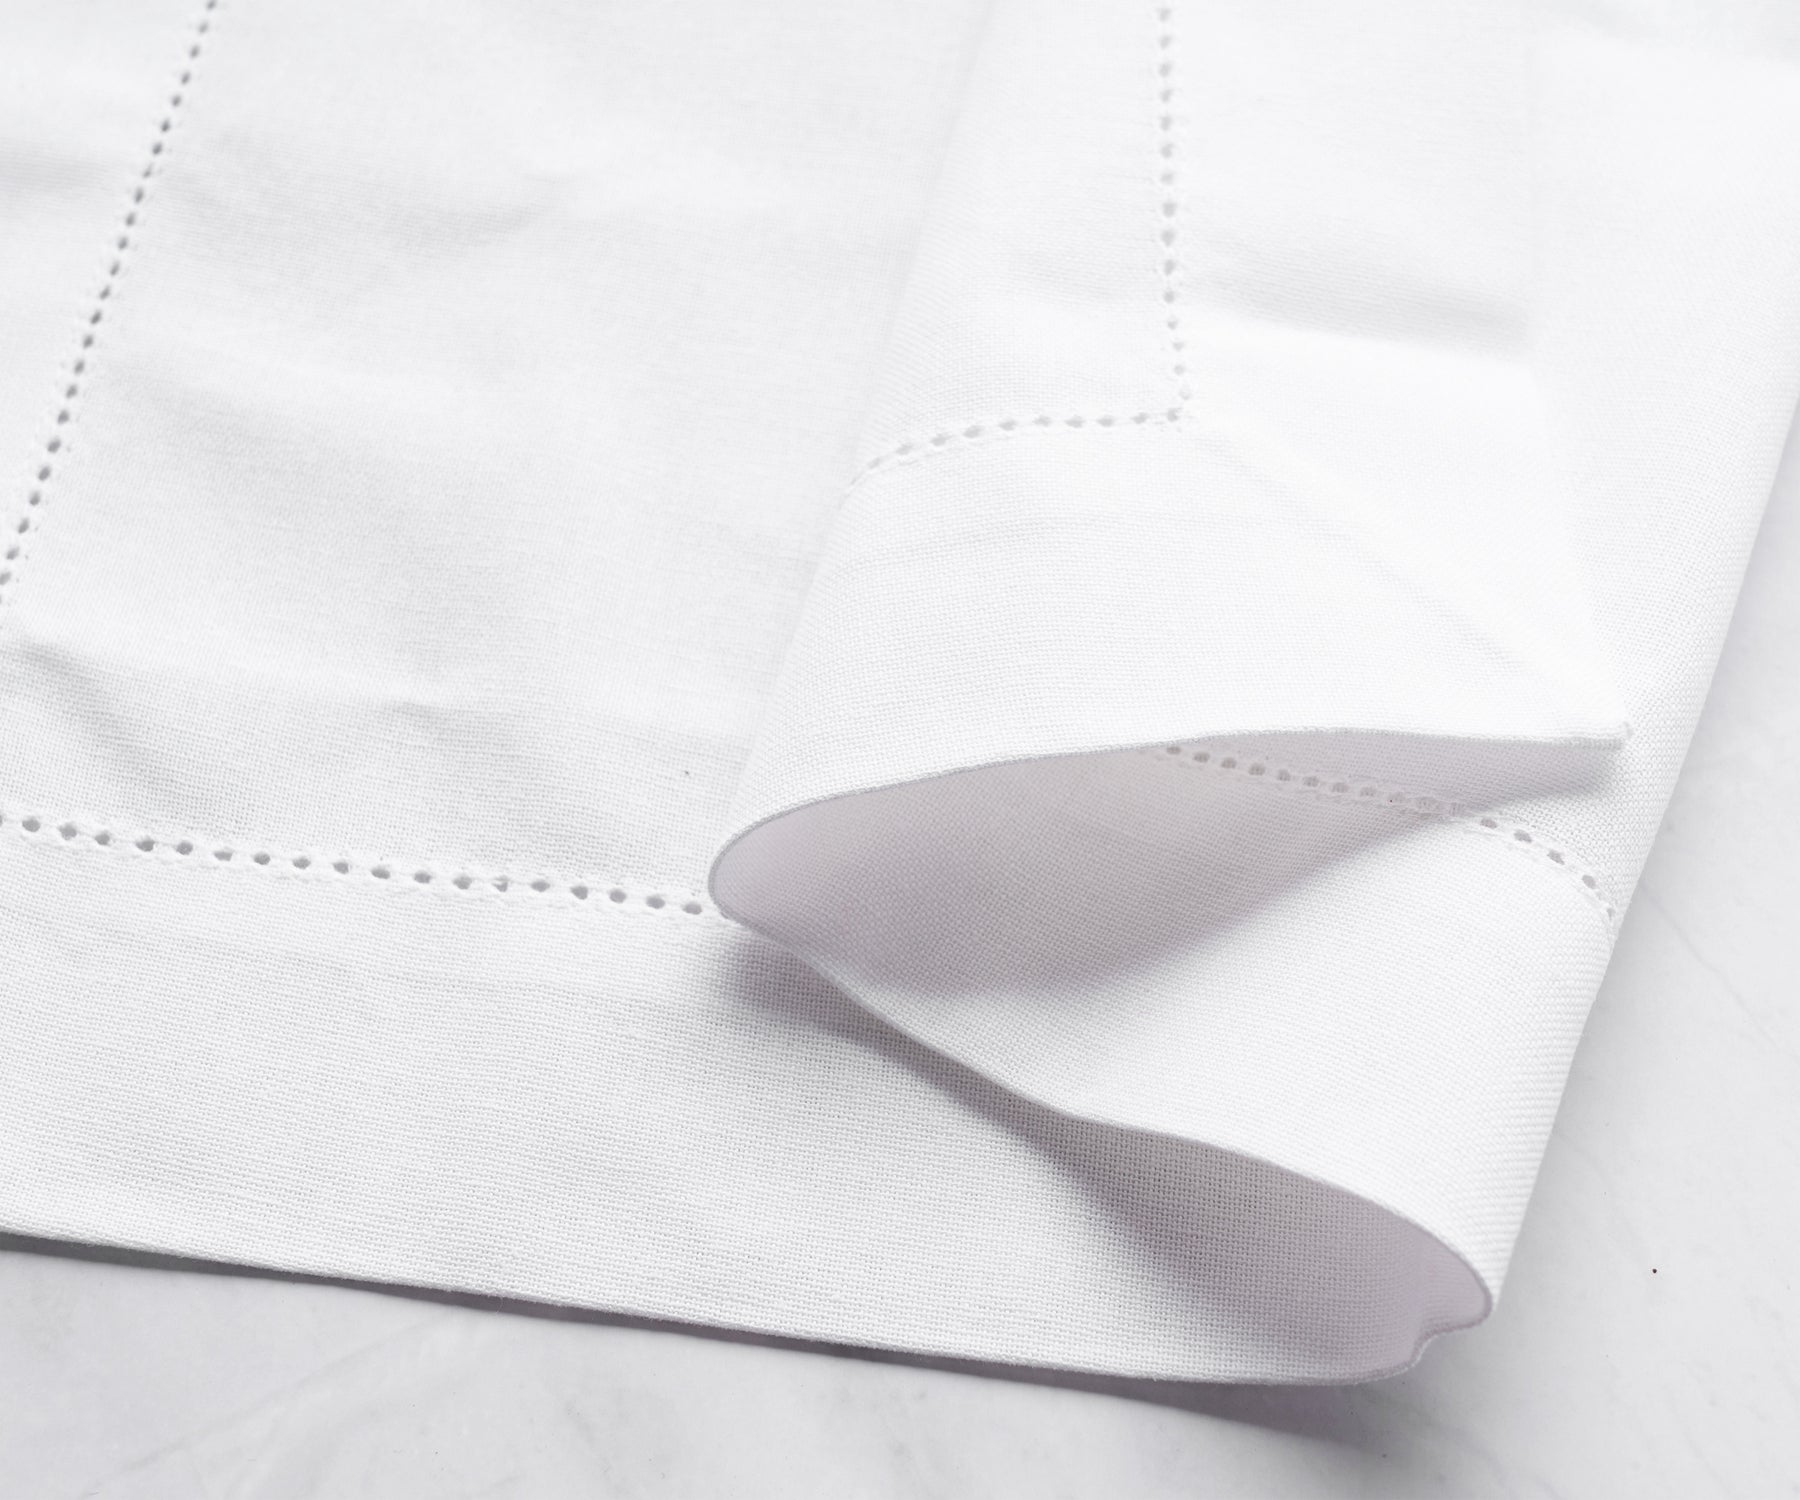 Complete your dining experience with a set of stylish Wedding Table Napkins.